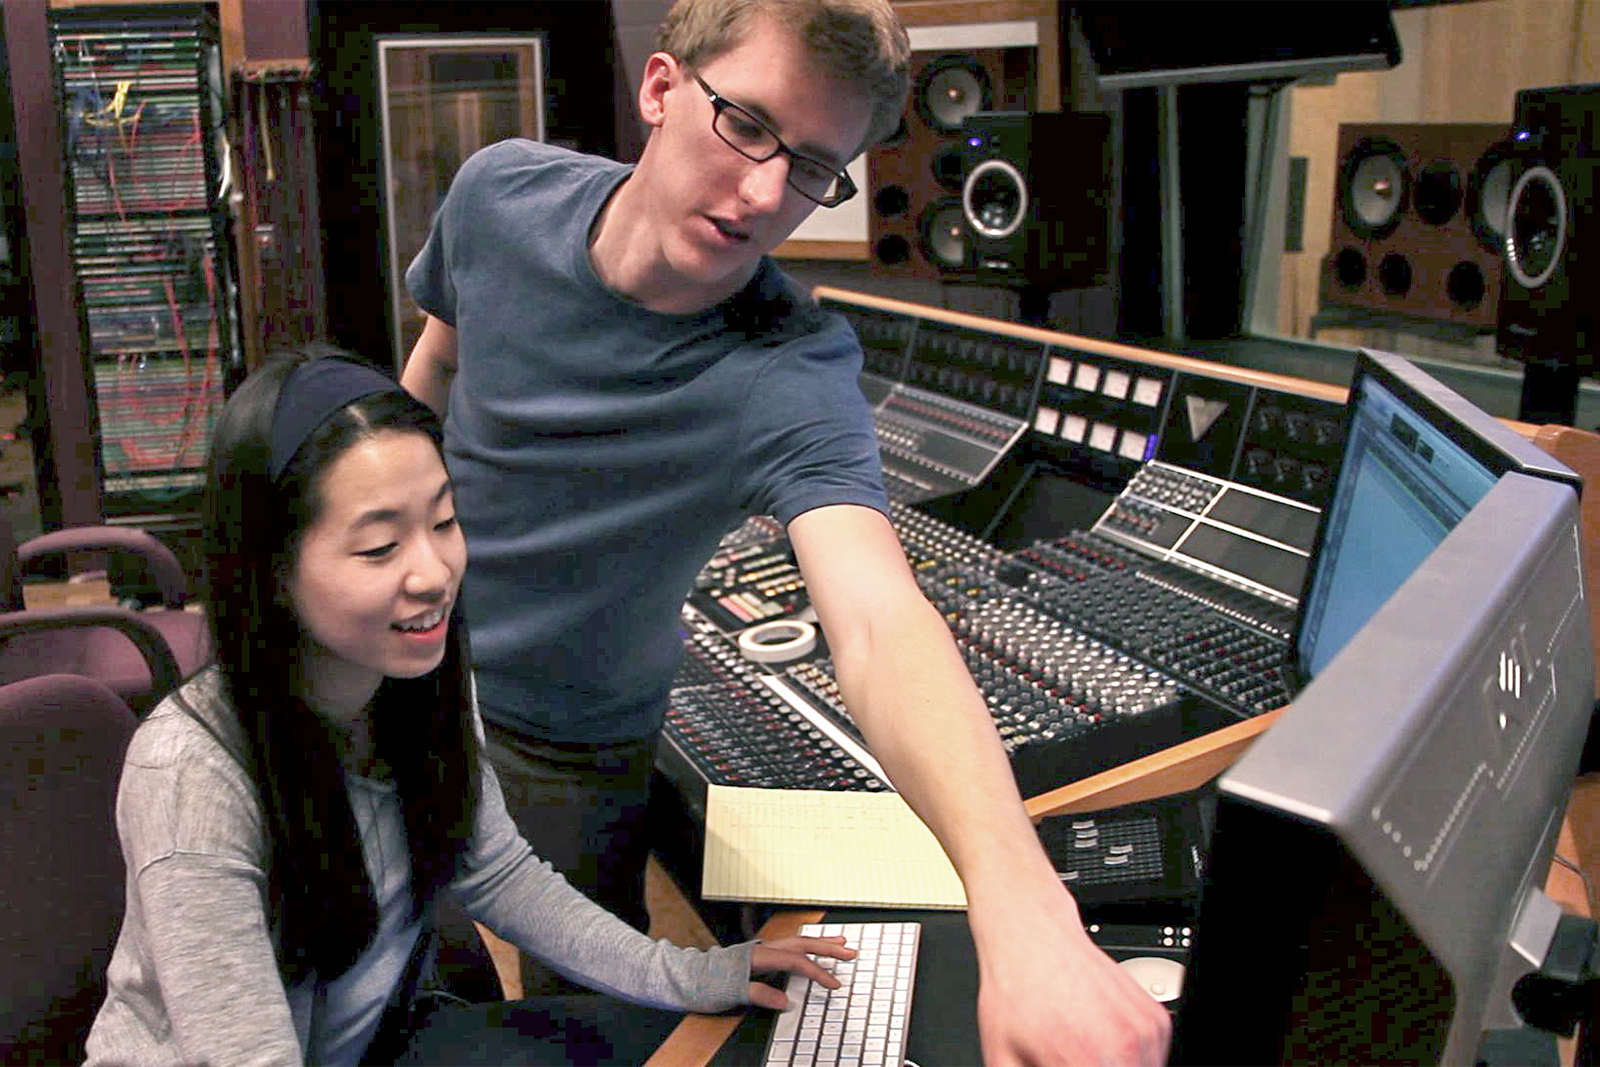 A student advisor provides advice and orientation to a user in Audio Studio A - one of the most advanced audio production studios in any university in the U.S.